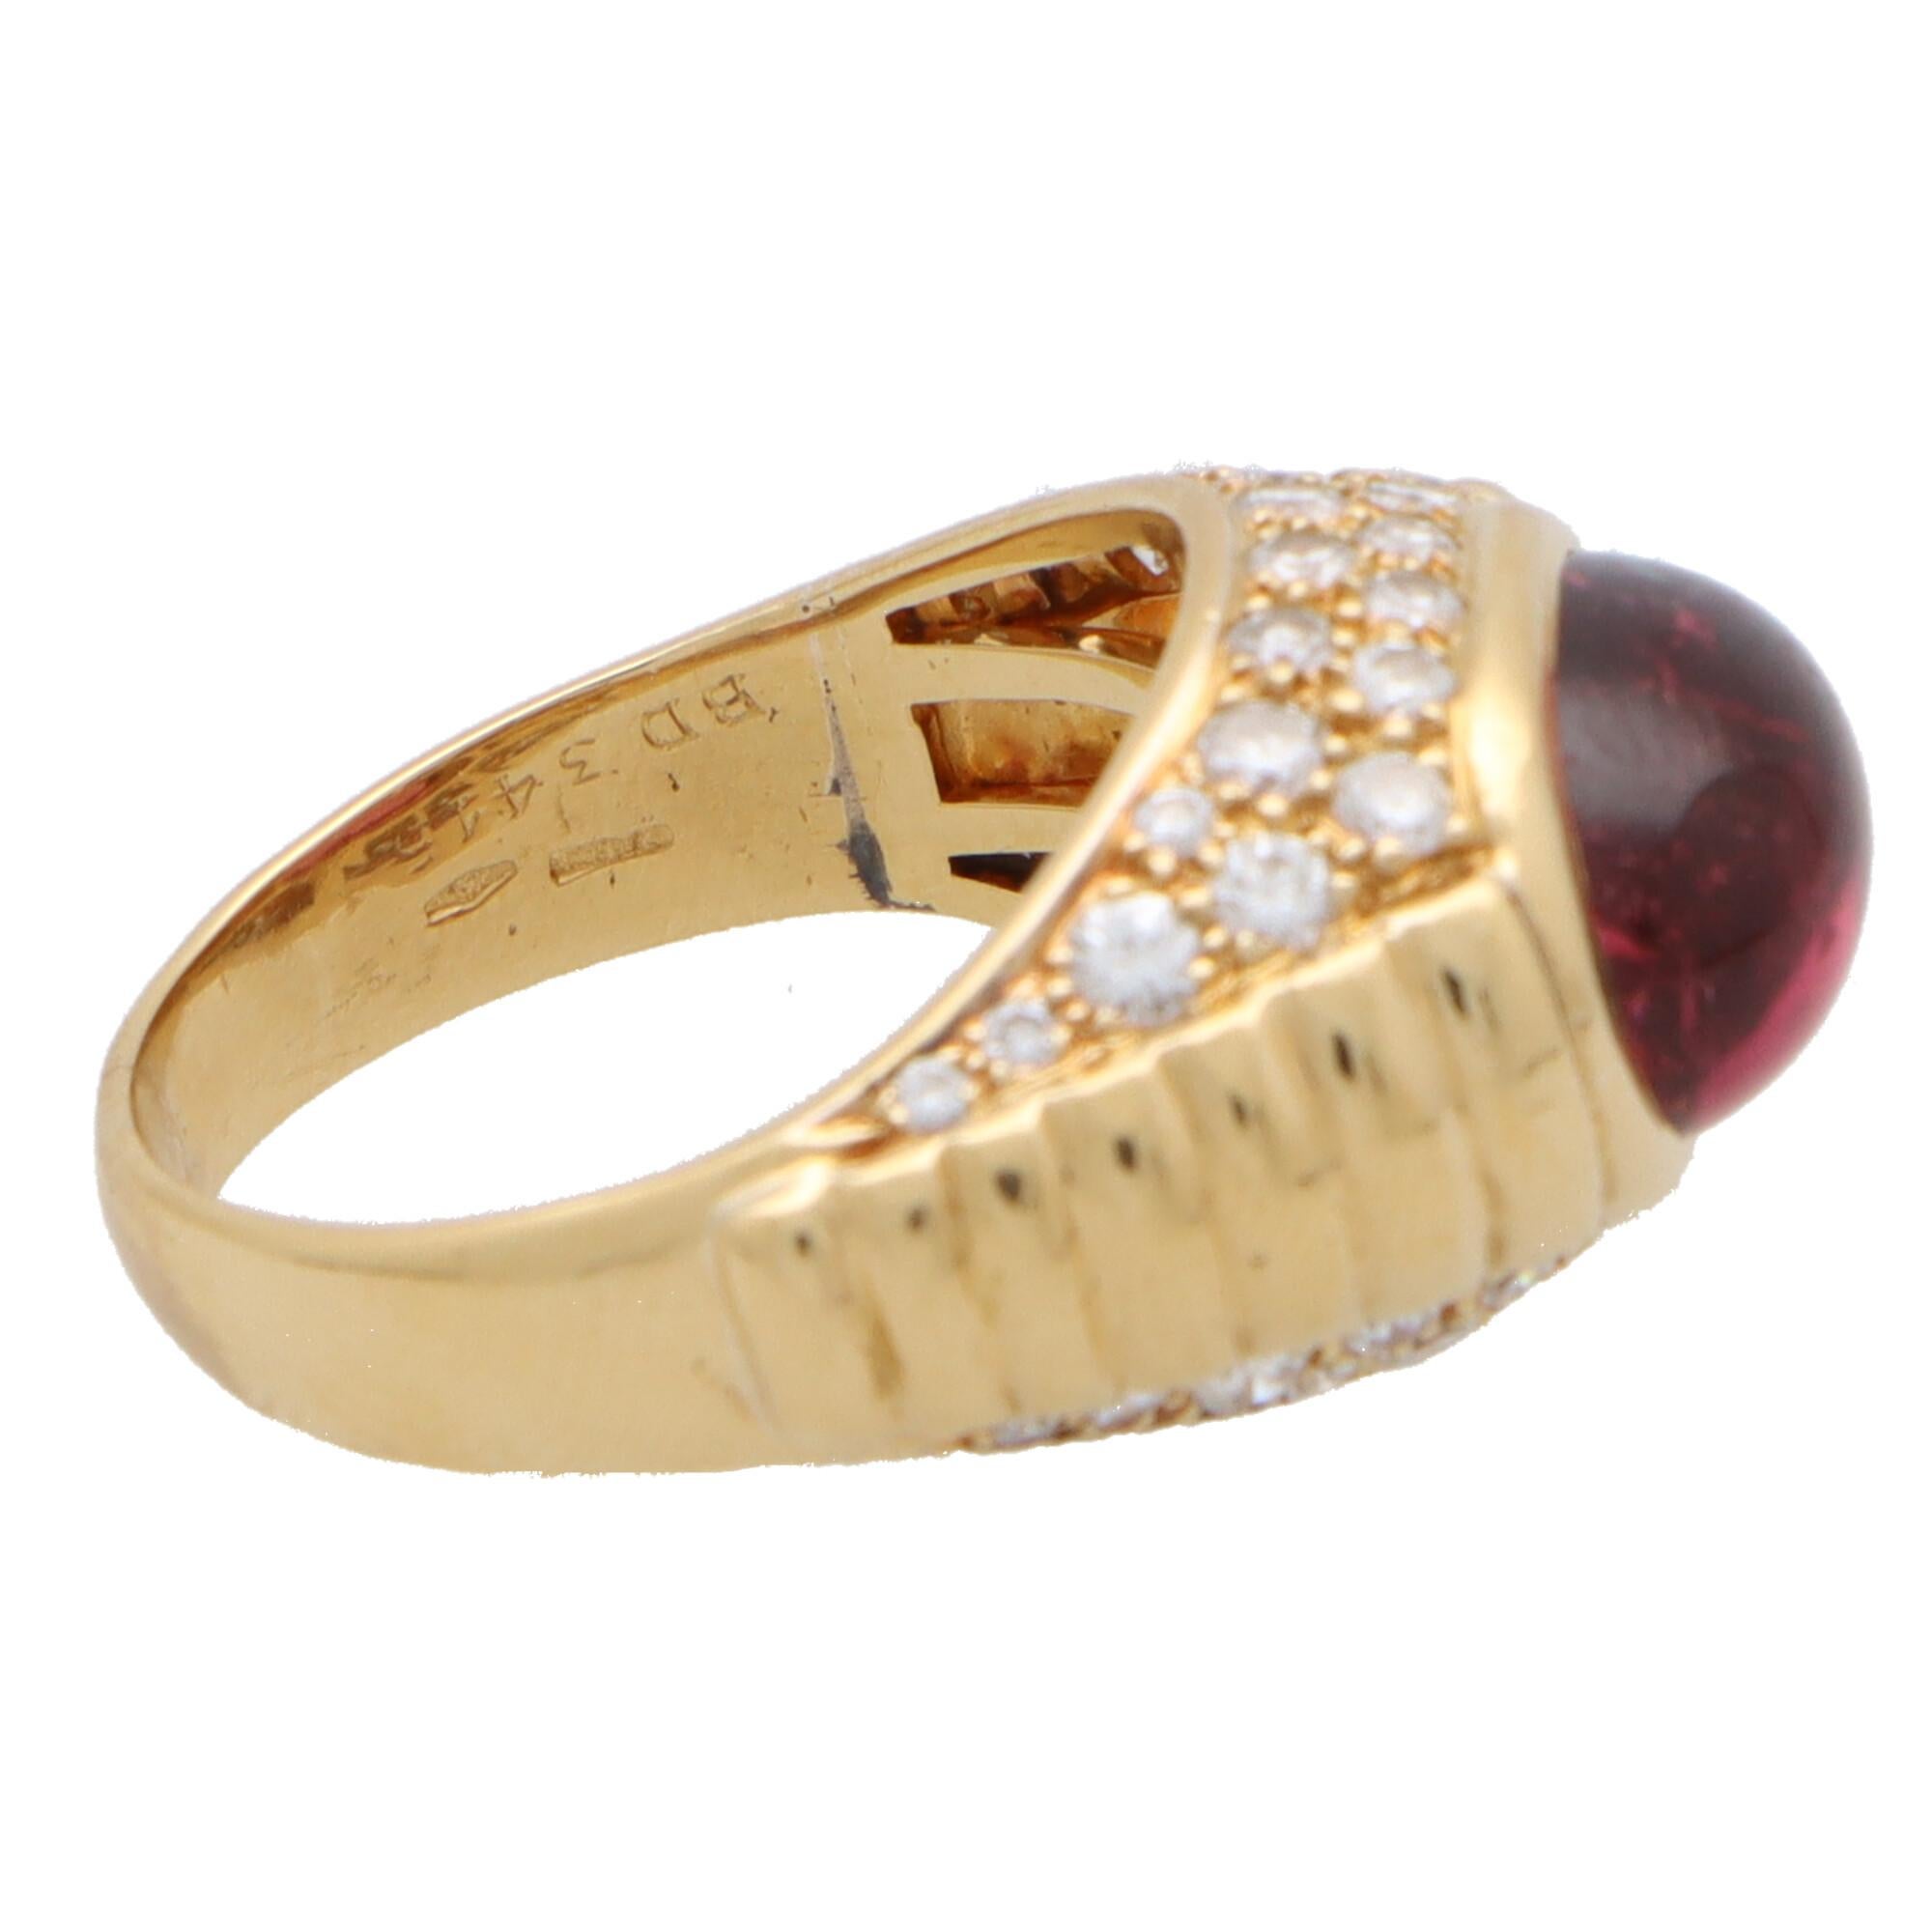 Vintage Bvlgari Tourmaline and Diamond Bypass Ring Set in 18k Yellow Gold For Sale 2